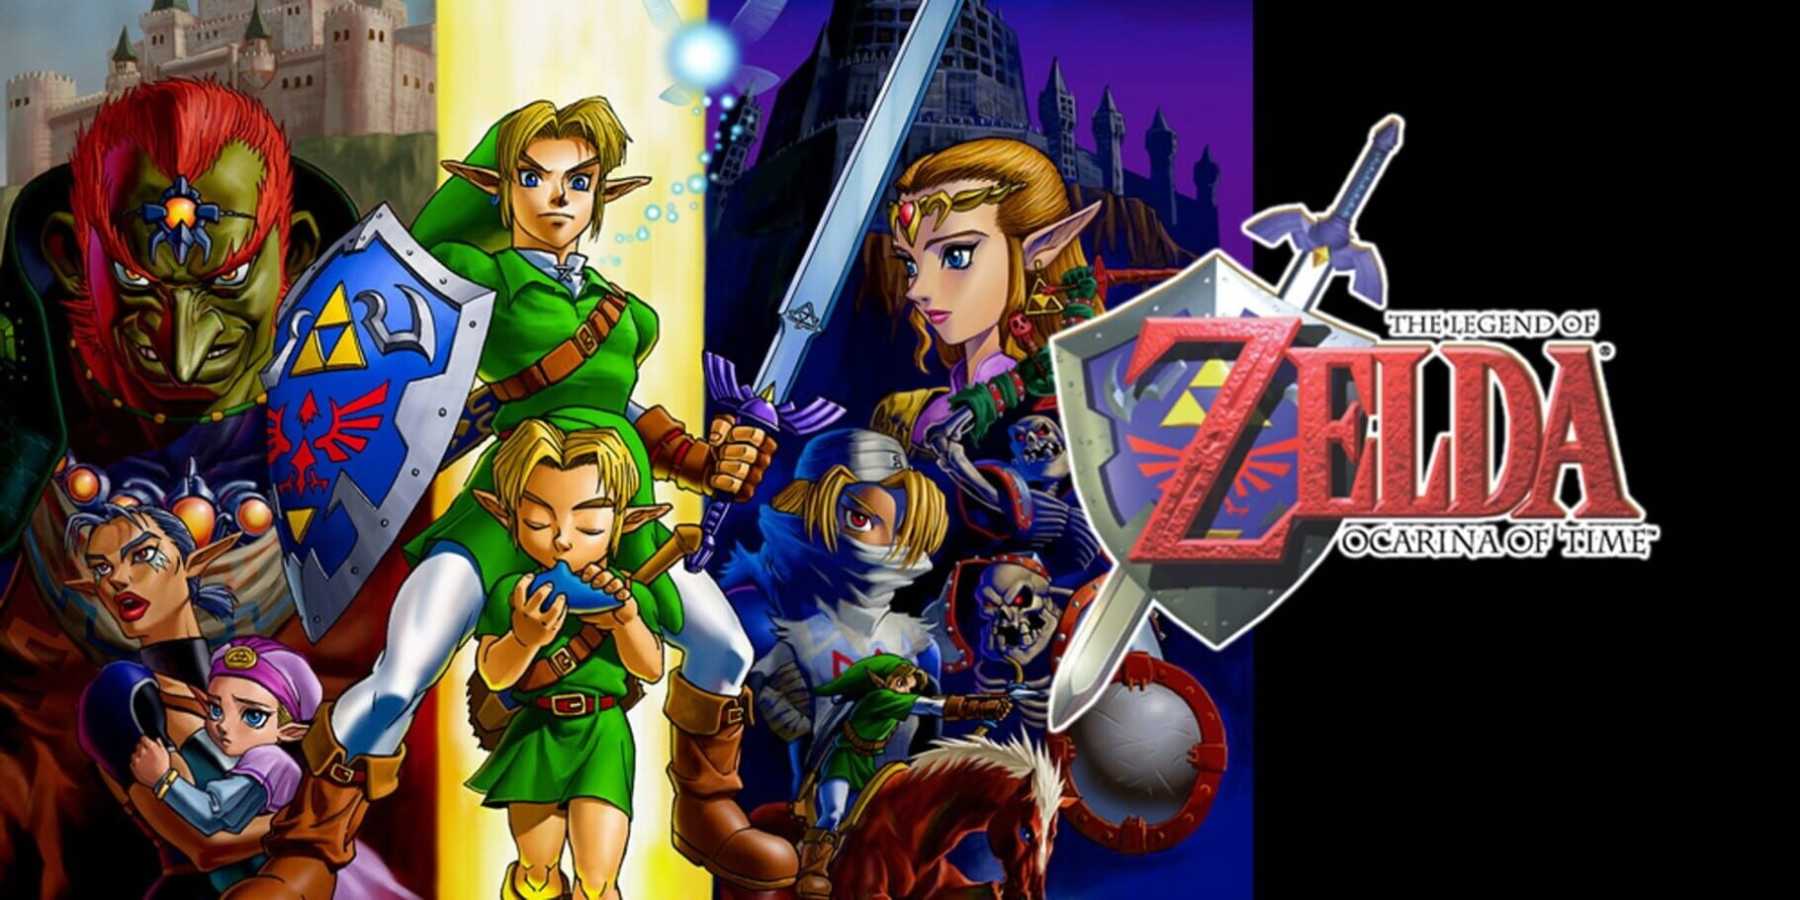 Greatest Video Game Sequels Ever